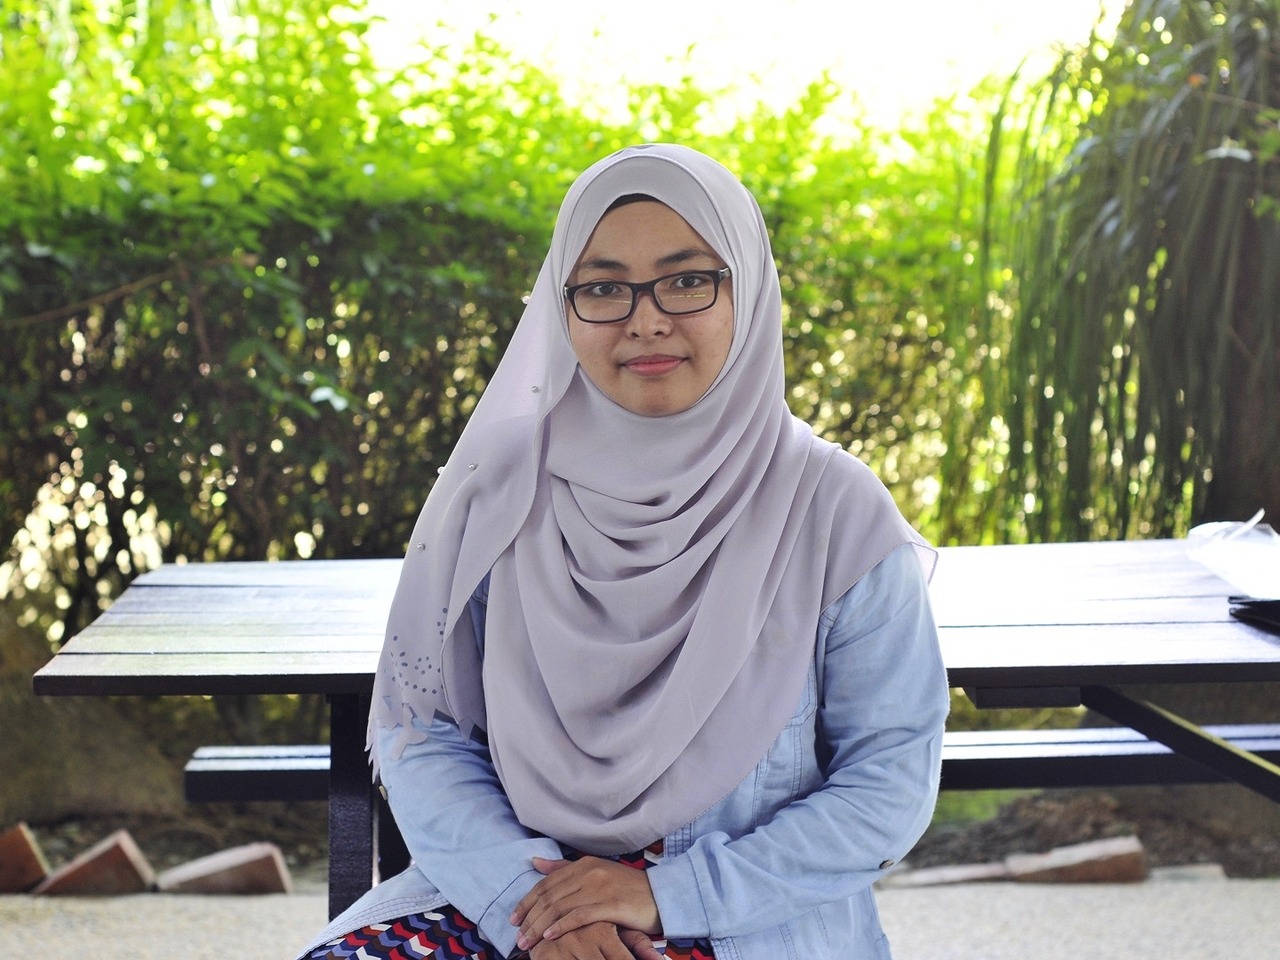 “I learned a lot as a student at Curtin Malaysia. Before that, I was very quiet, shy and not comfortable interacting with others. But during my years at the university, I learned to socialise more and picked up some important soft skills by joining...